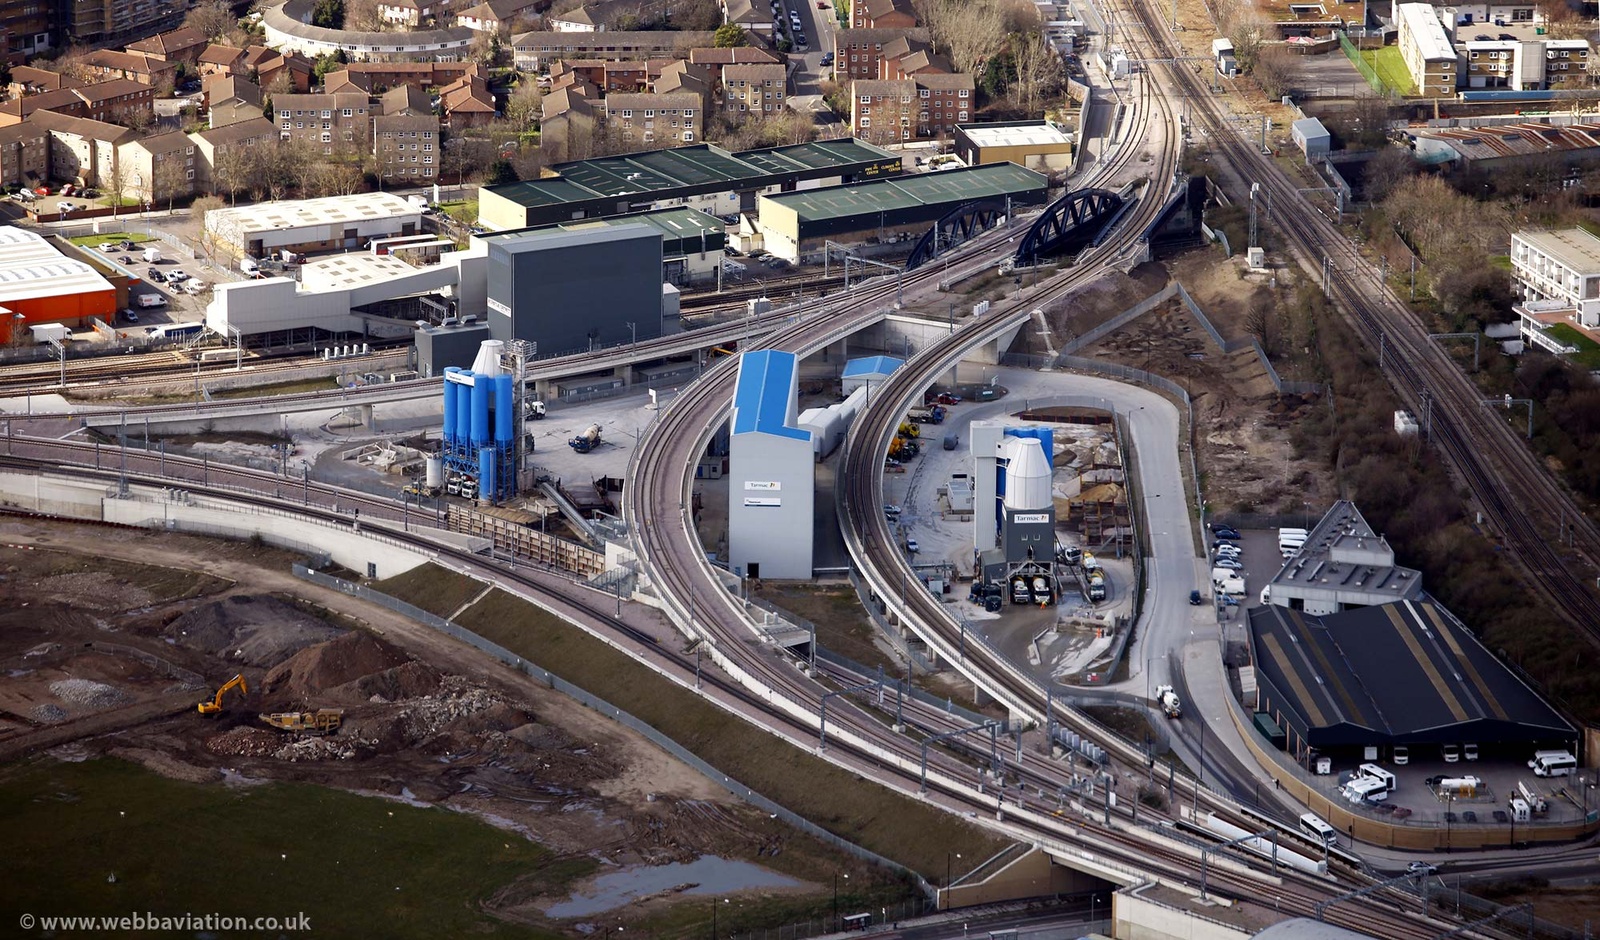 Tarmac Concrete Plant in  London  completly surrounded by railway lines  from the air